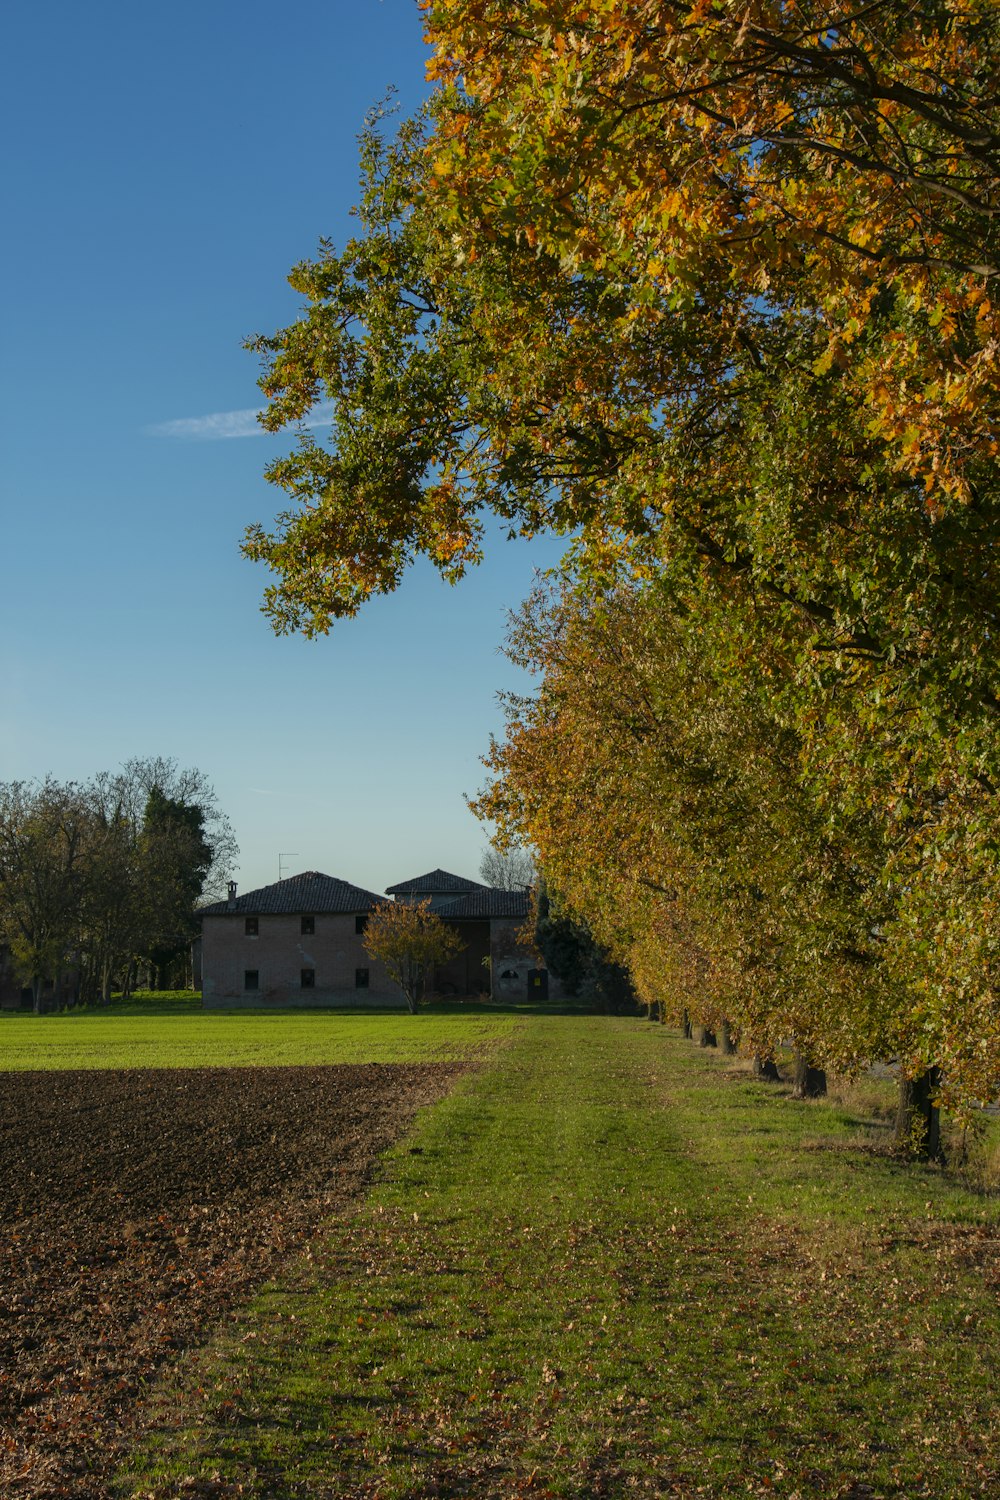 green grass field with trees and houses